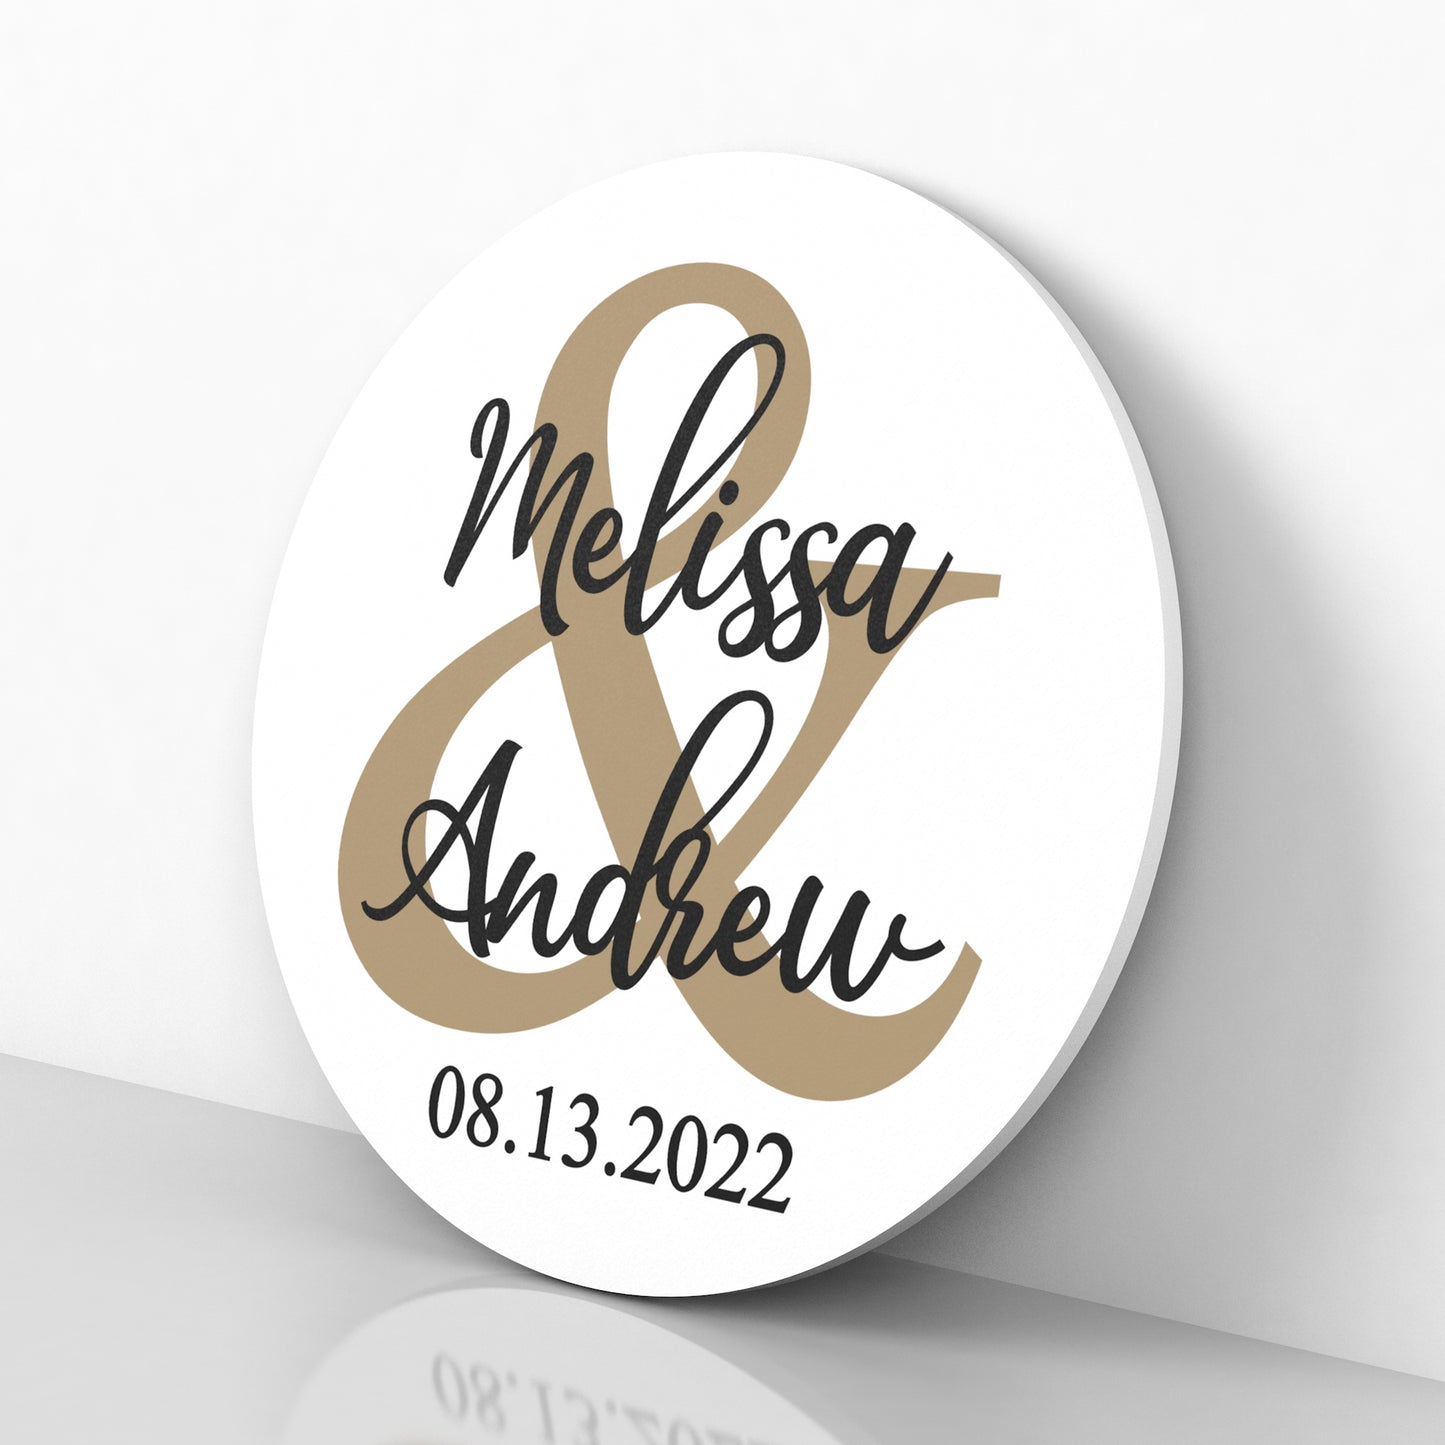 Personalized Name Sign. Dating, Engagement, Wedding, Anniversary Gift